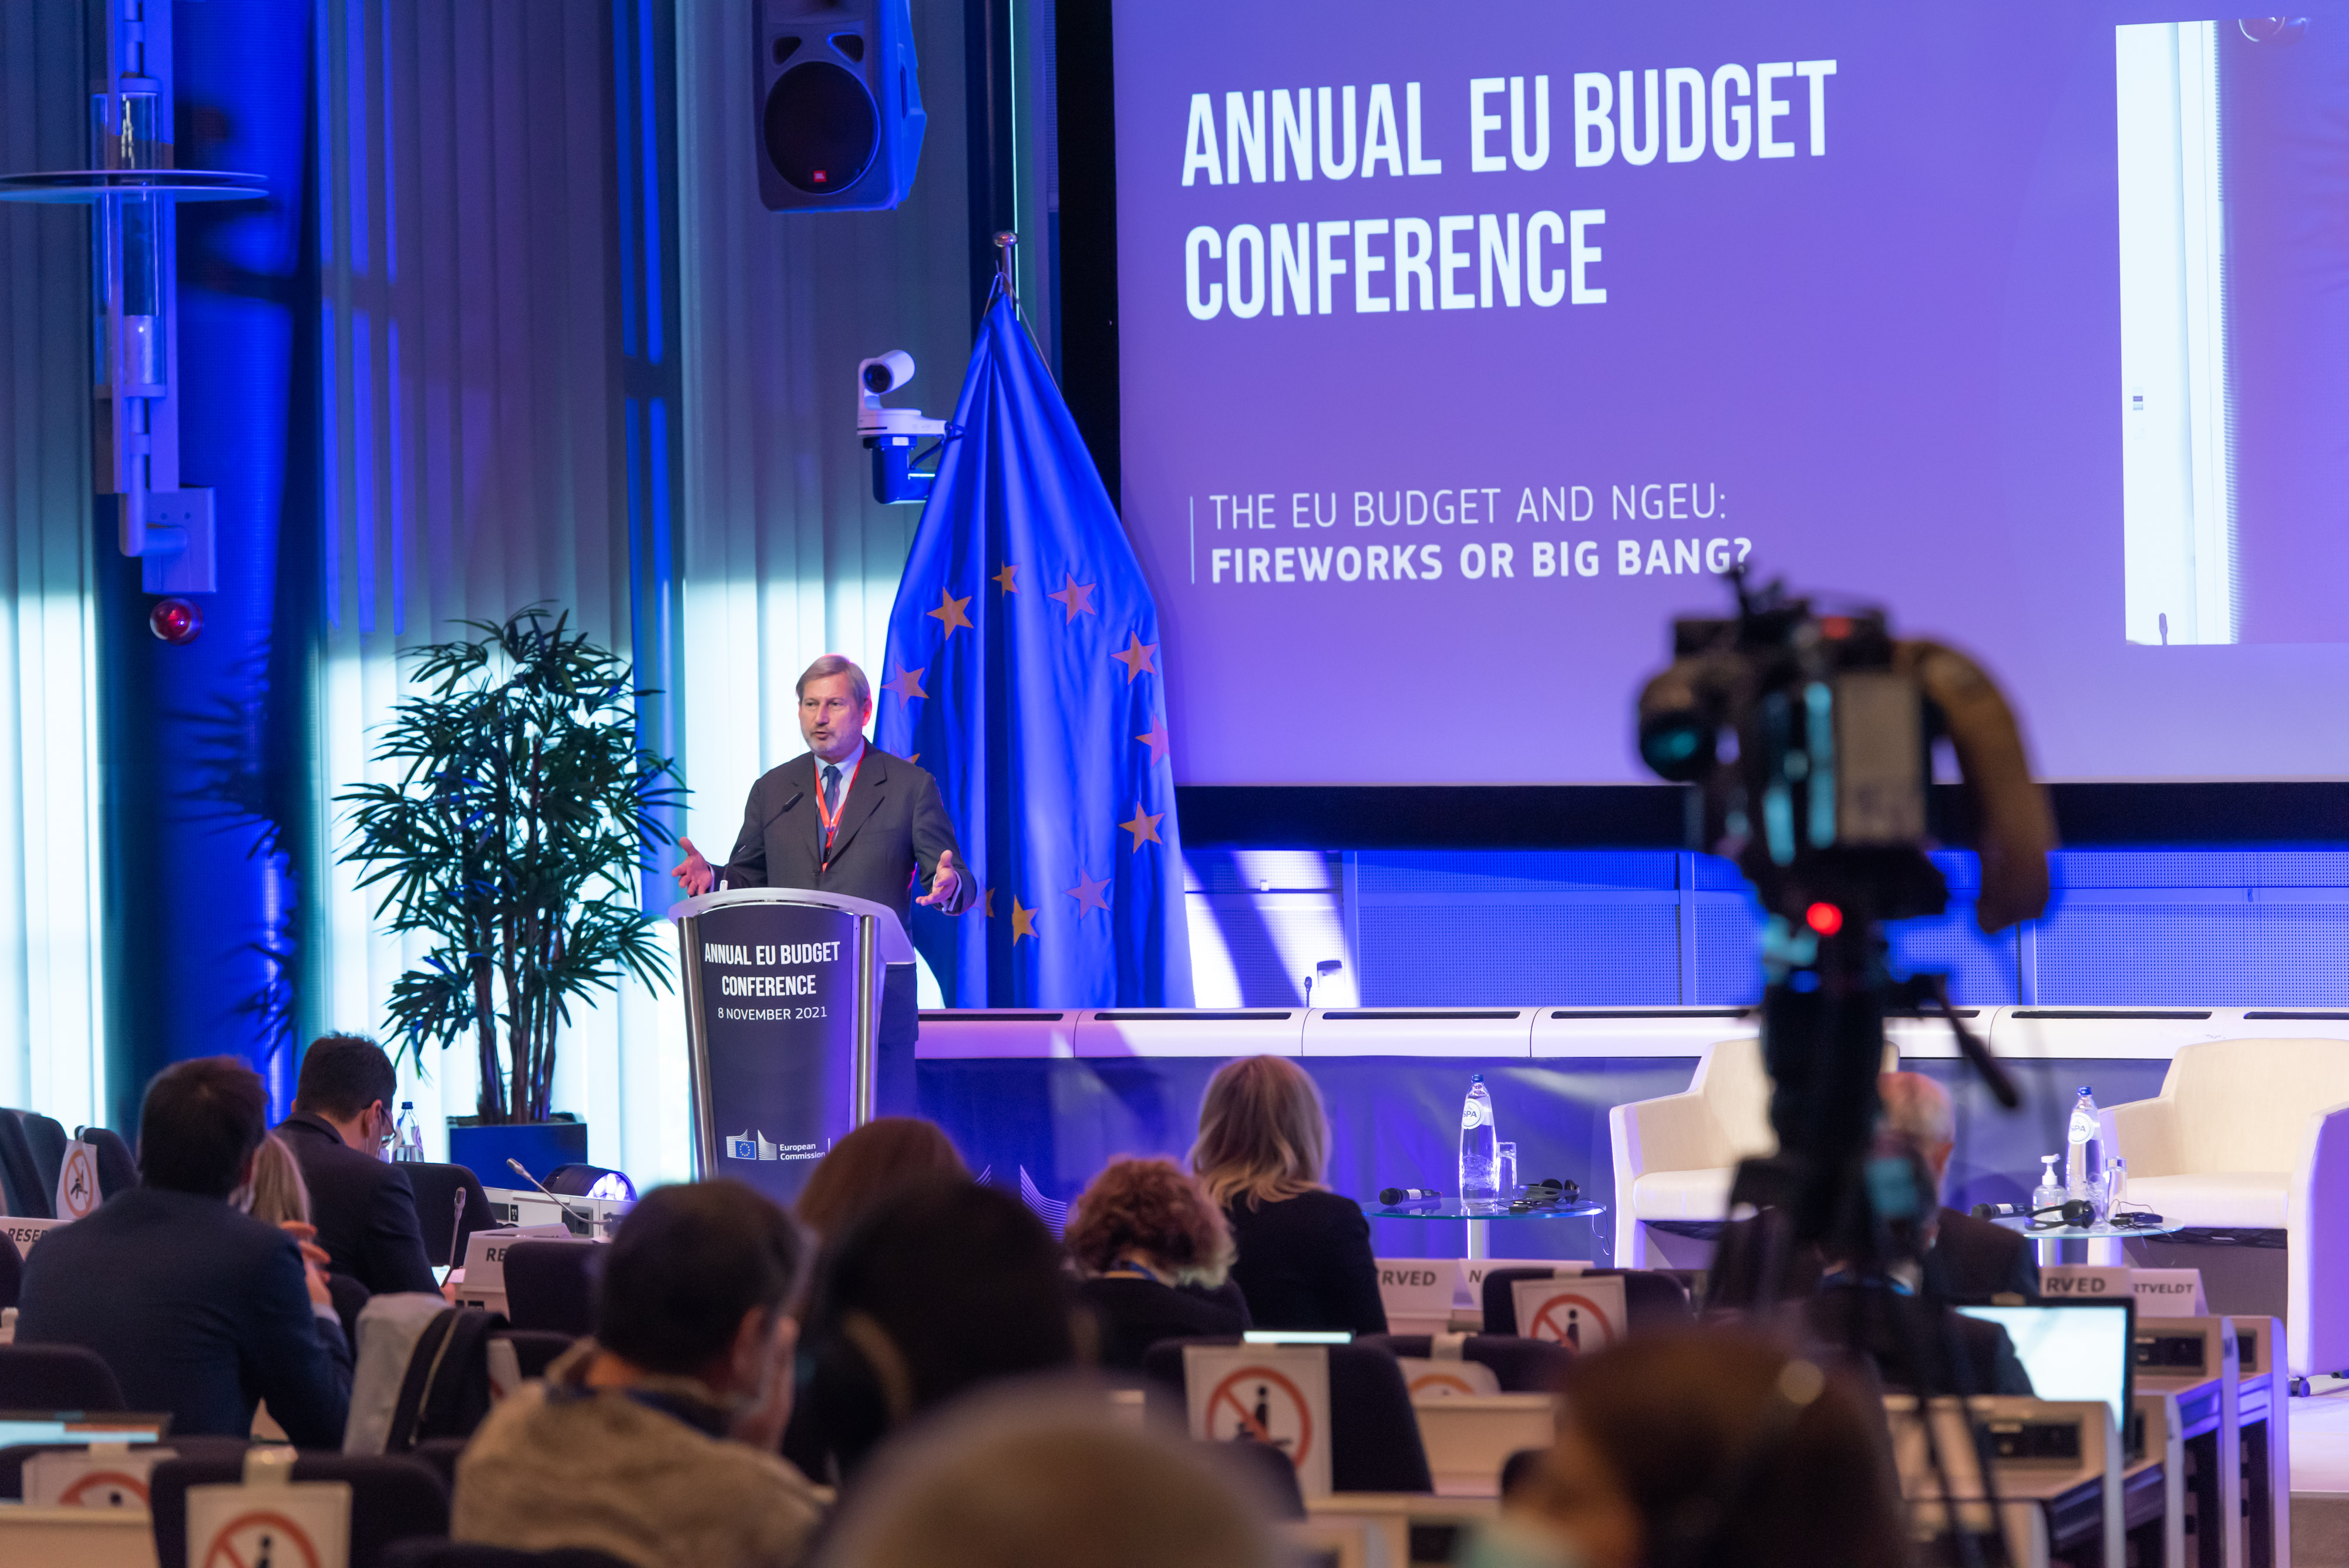 Annual EU Budget Conference 2021 - Introduction by Johannes Hahn